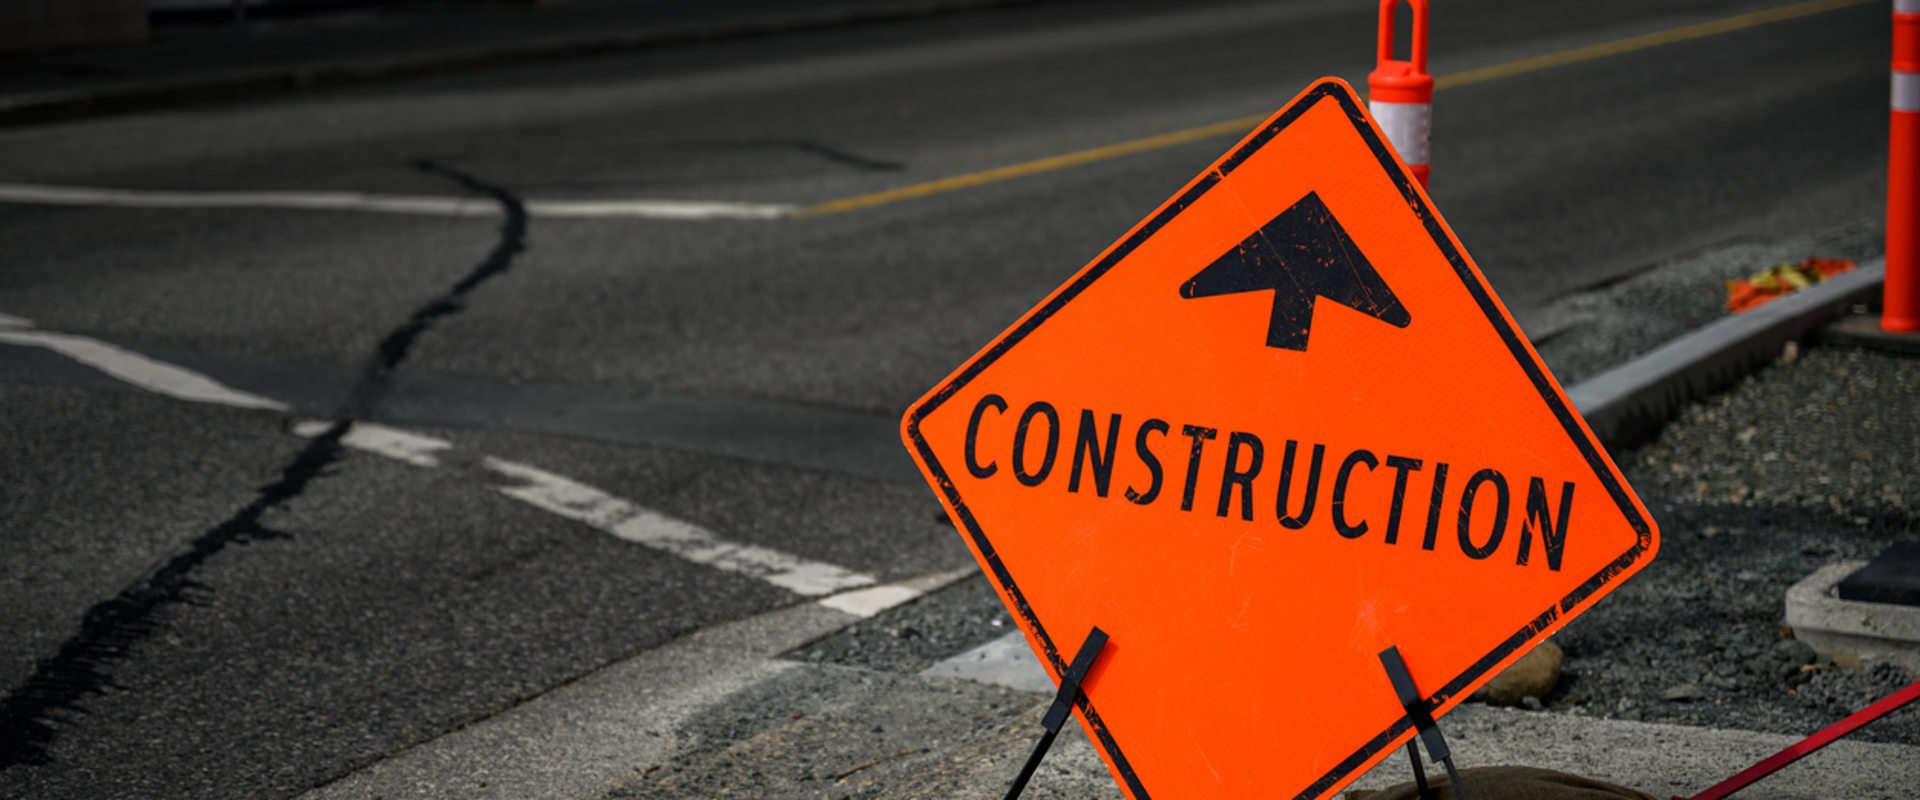 Why are construction signs important?